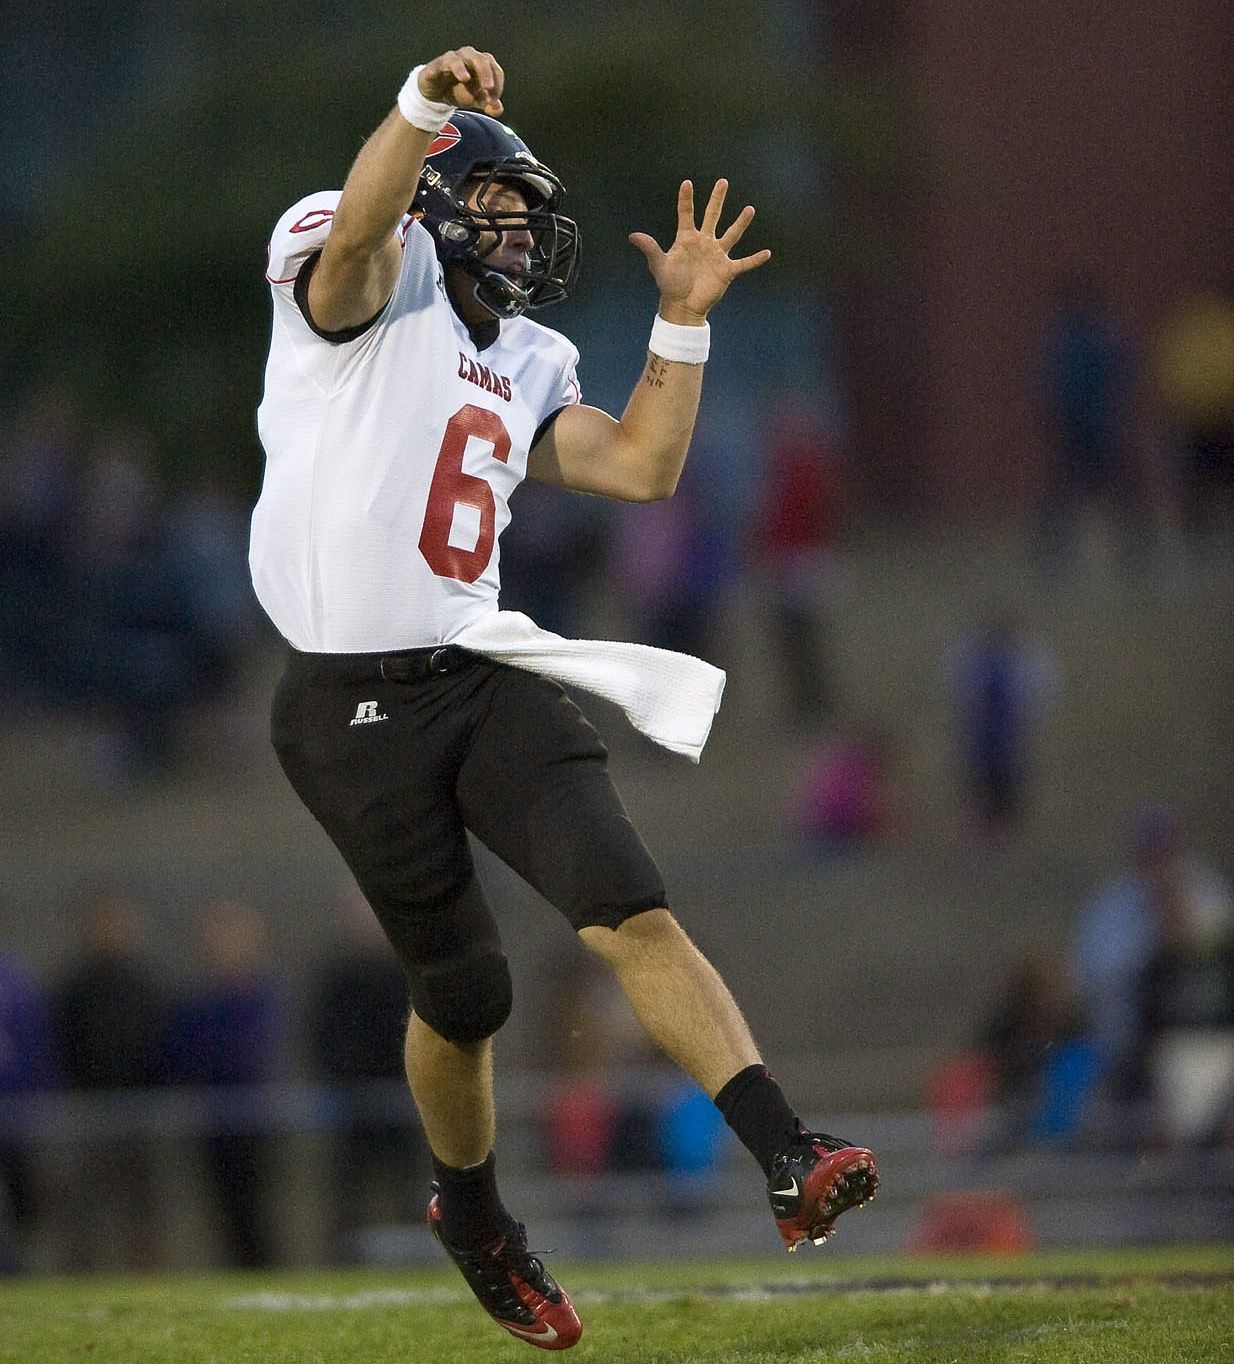 Camas' Tony Gennaro has passed for 527 yards and five touchdowns this season.